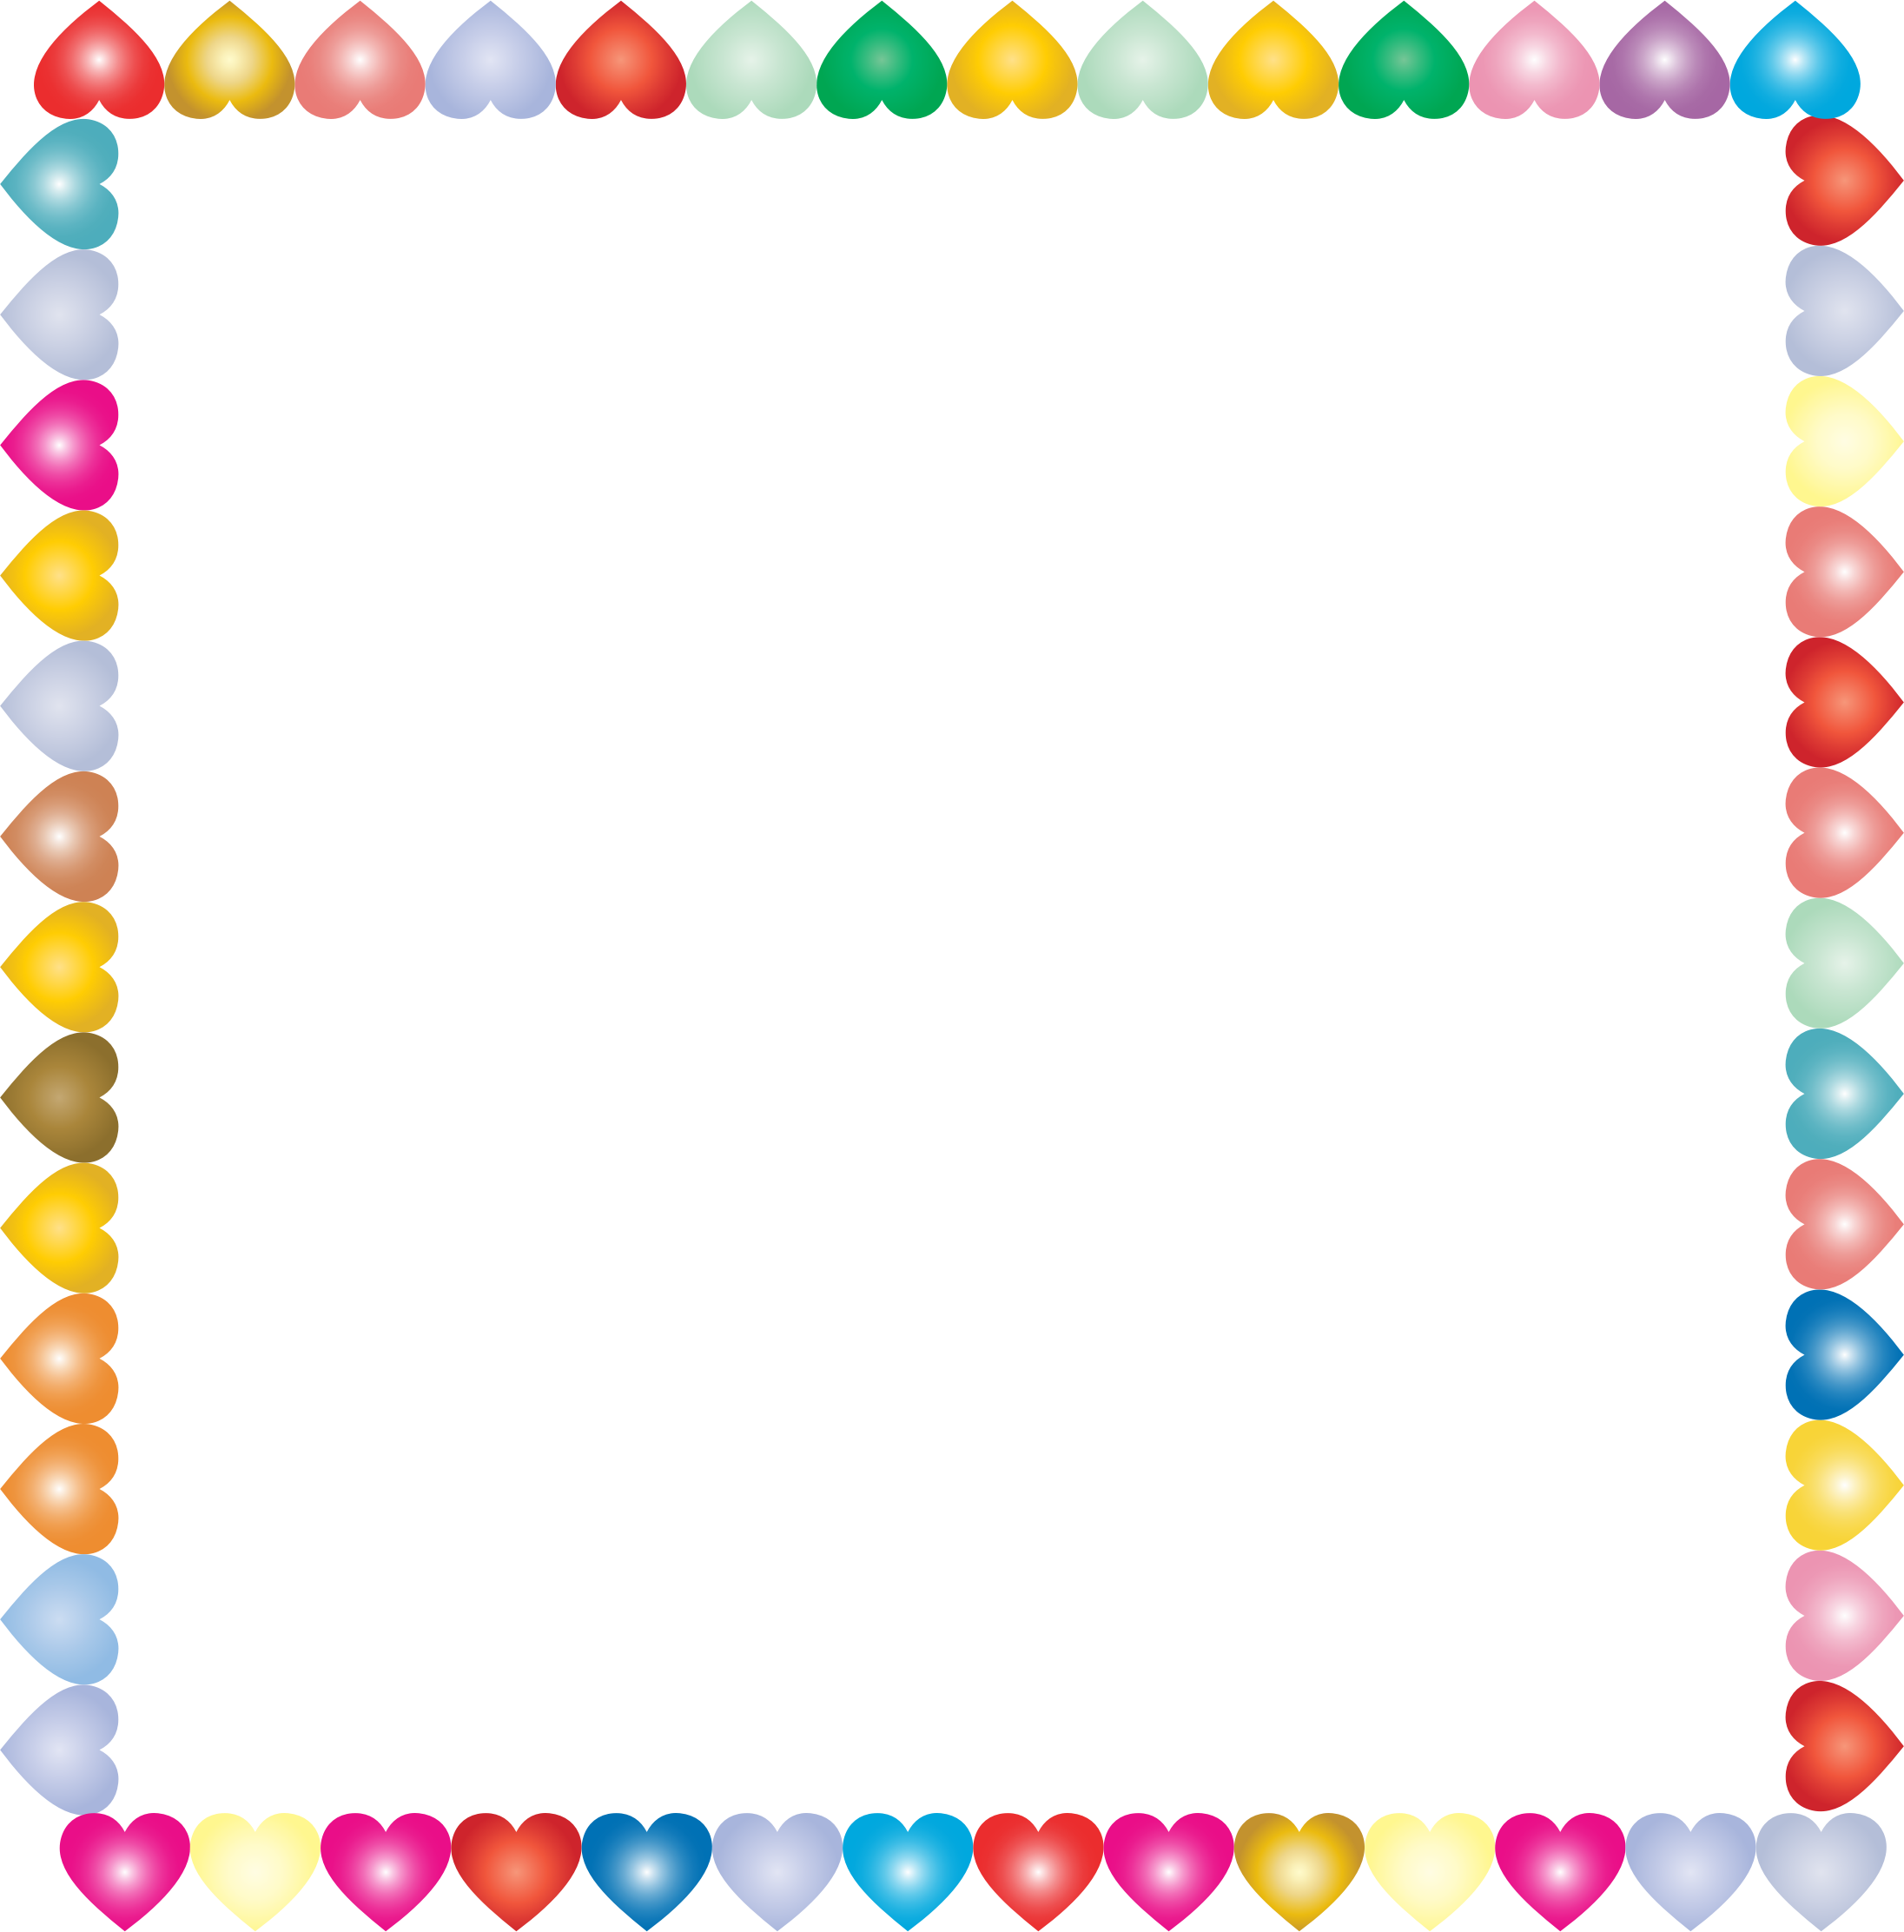 A Square Frame Of Colorful Hearts